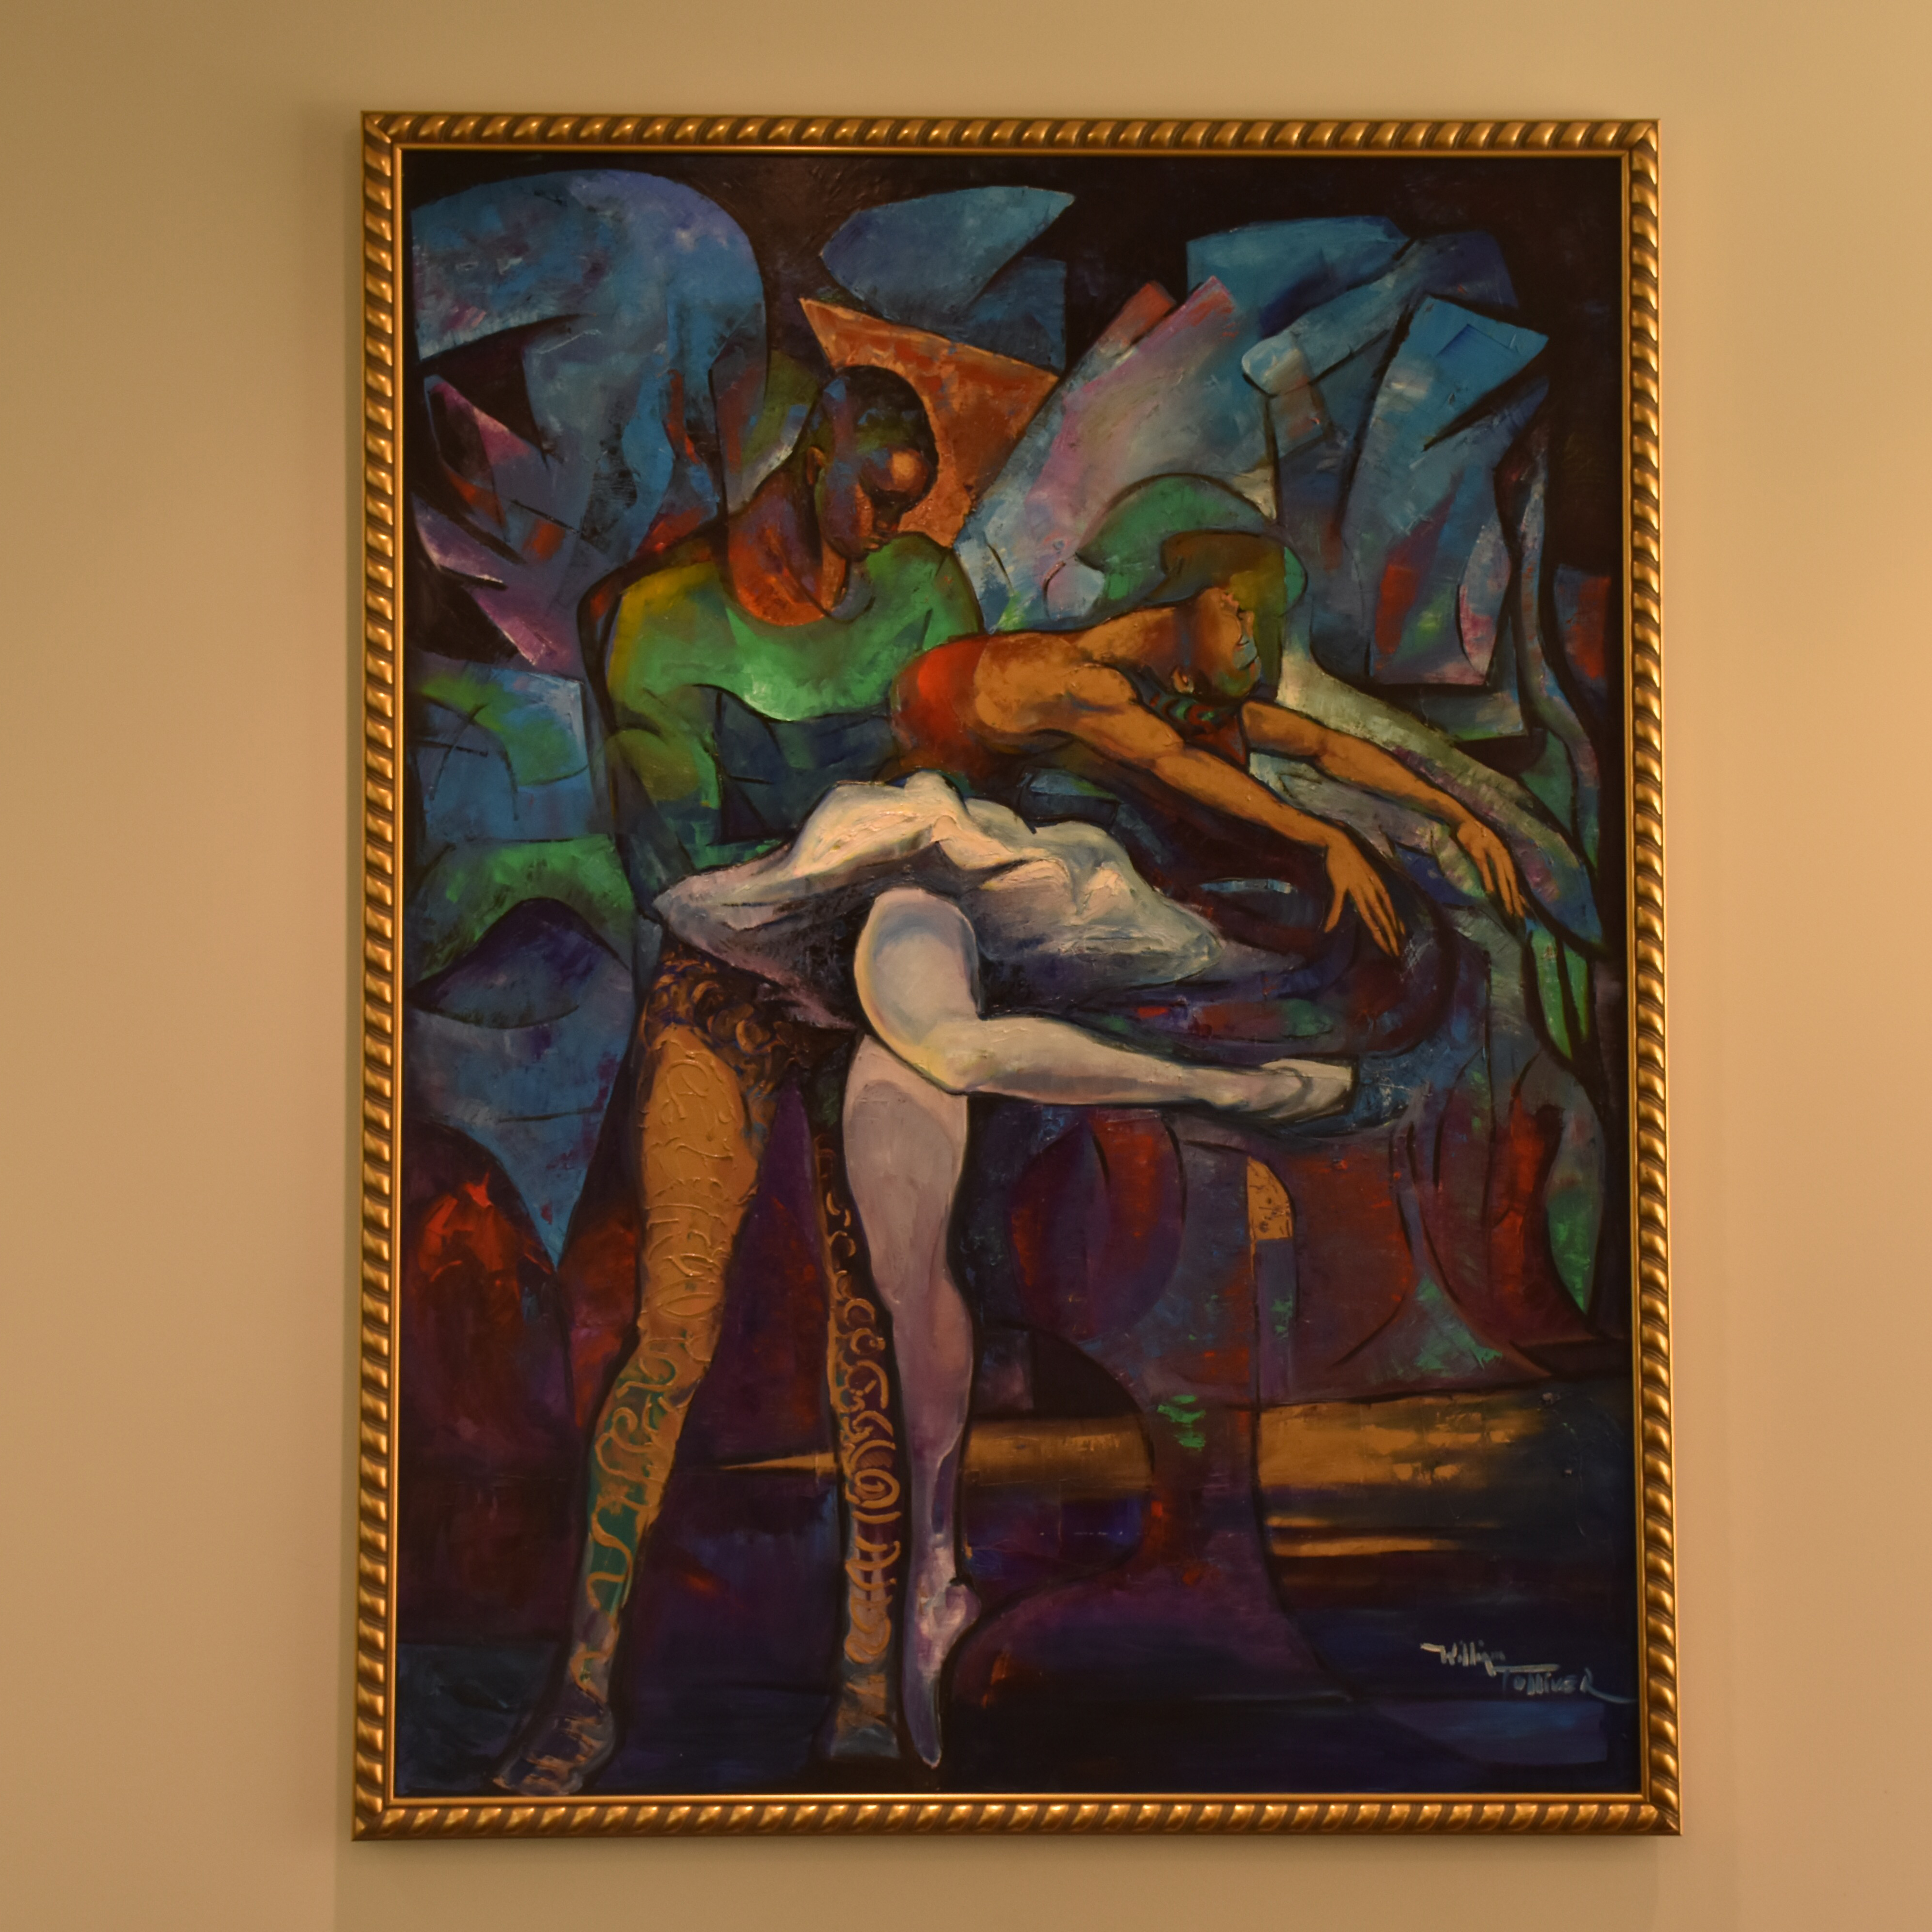 Pas de Deux” by William Tolliver is one of four painting hanging in the Arts and Humanities Building by Tolliver.